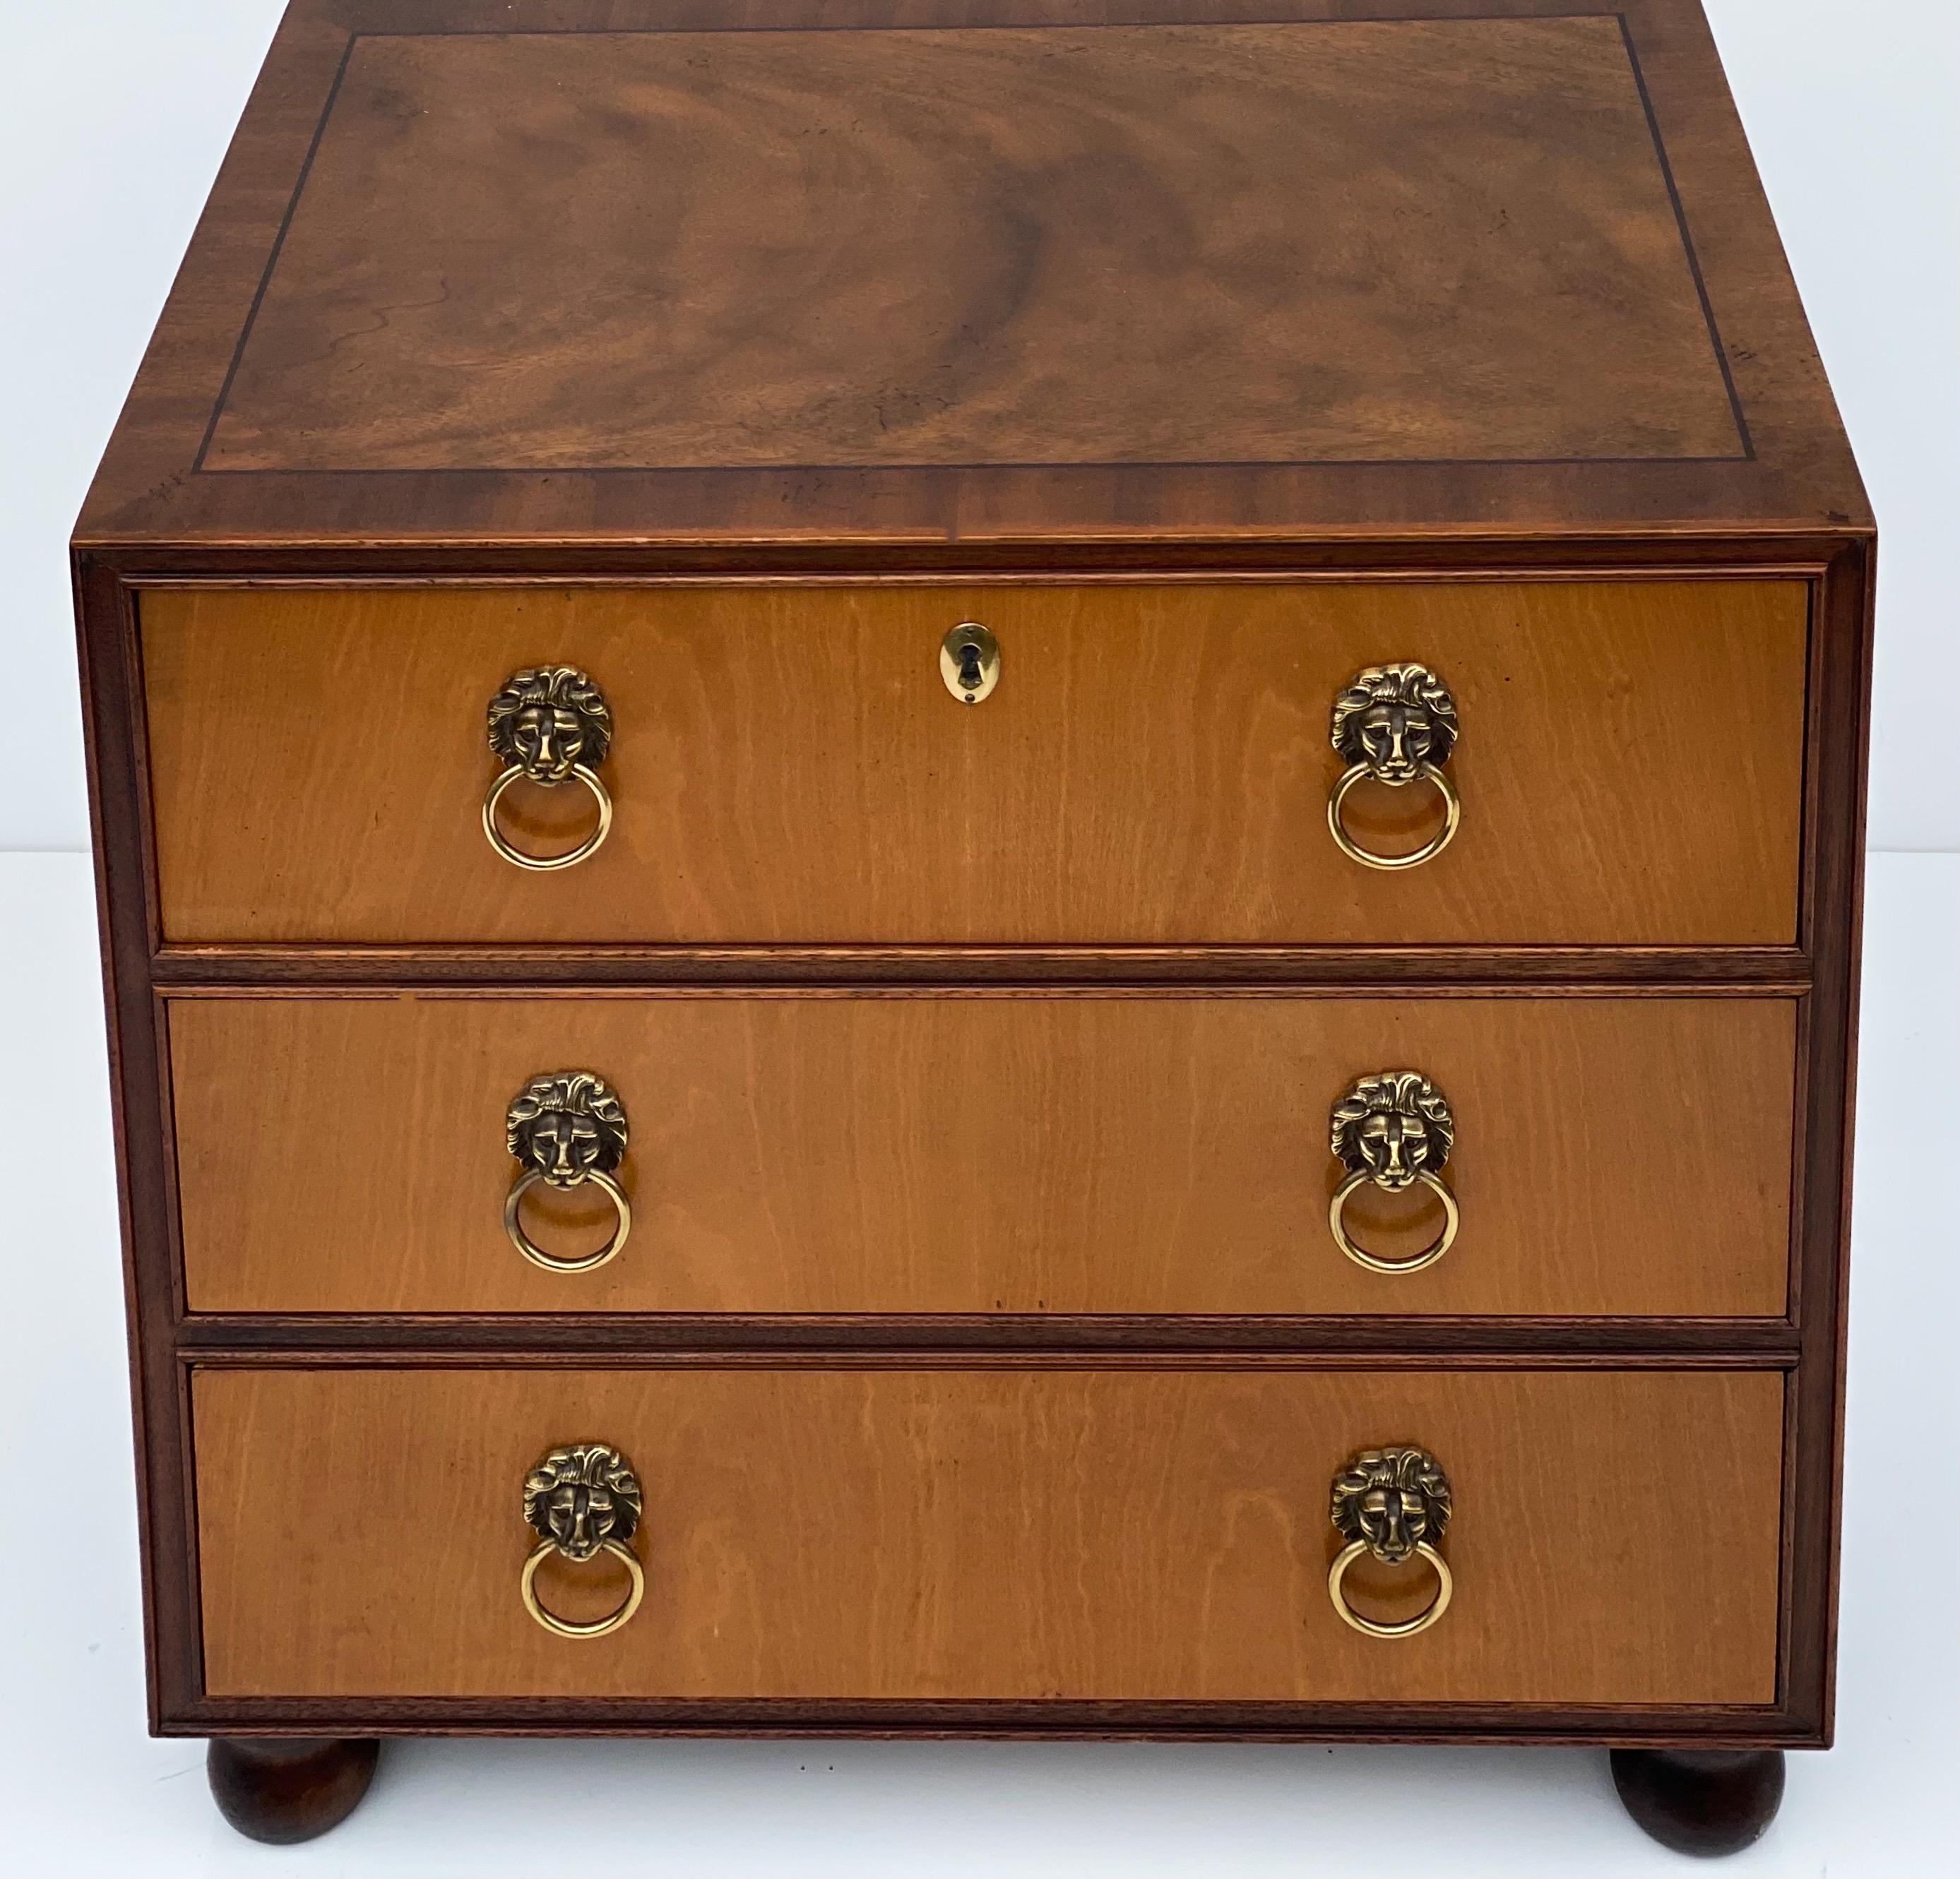 This diminutive neoclassical chest by Baker Furniture would make a nice jewelry casket or watch valet or even a side table. It is marked and in very good condition.